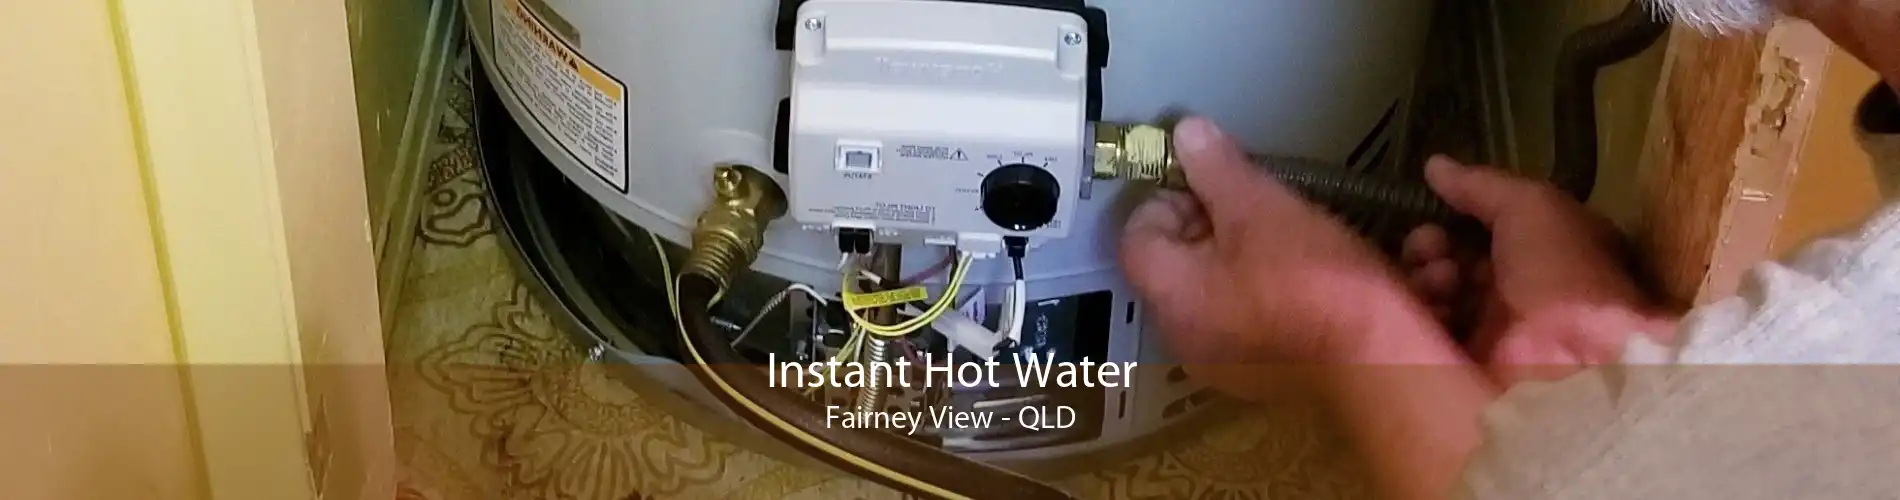 Instant Hot Water Fairney View - QLD